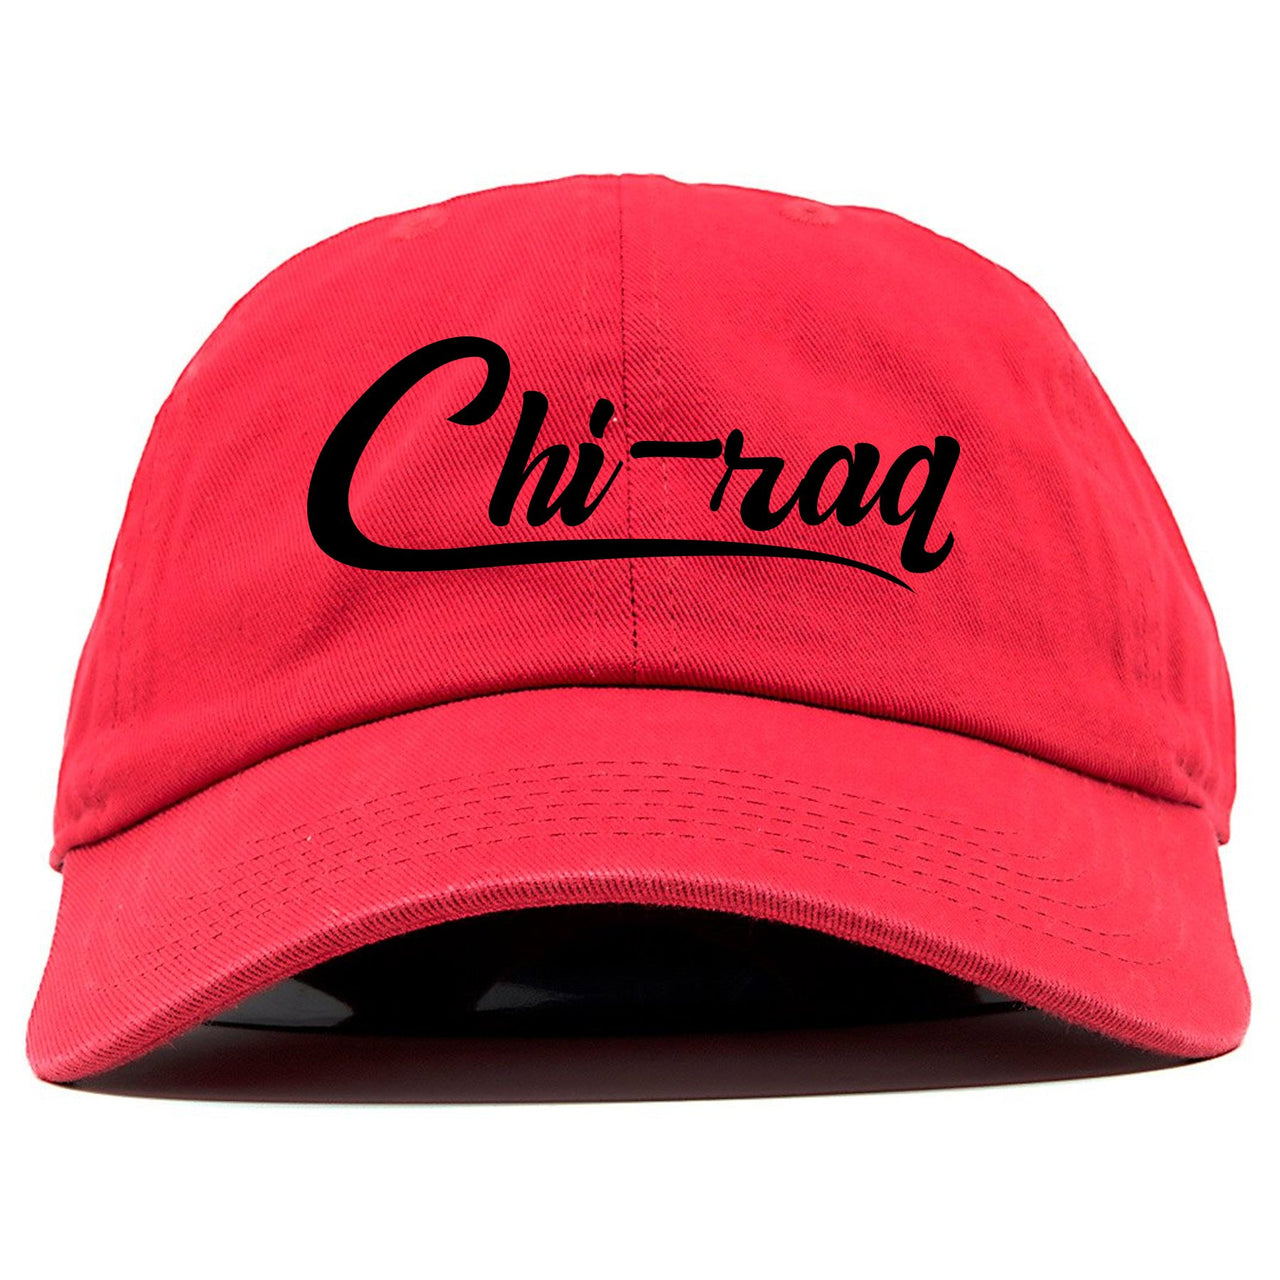 Reflections of a Champion 8s Dad Hat | Chiraq Script, Red